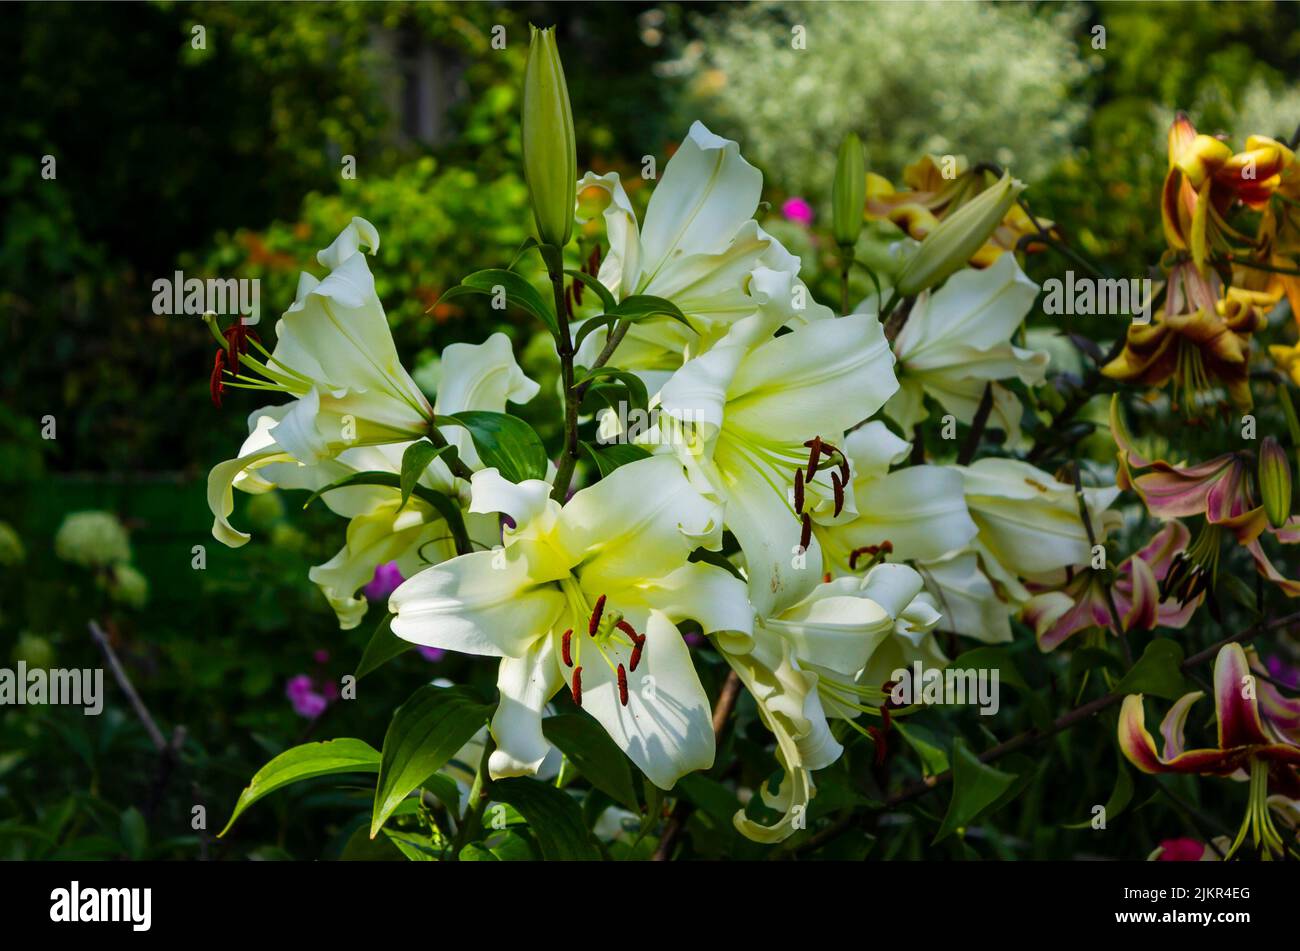 White lilies on a summer day. Beauty garden lily with white petals close up garden photo Stock Photo